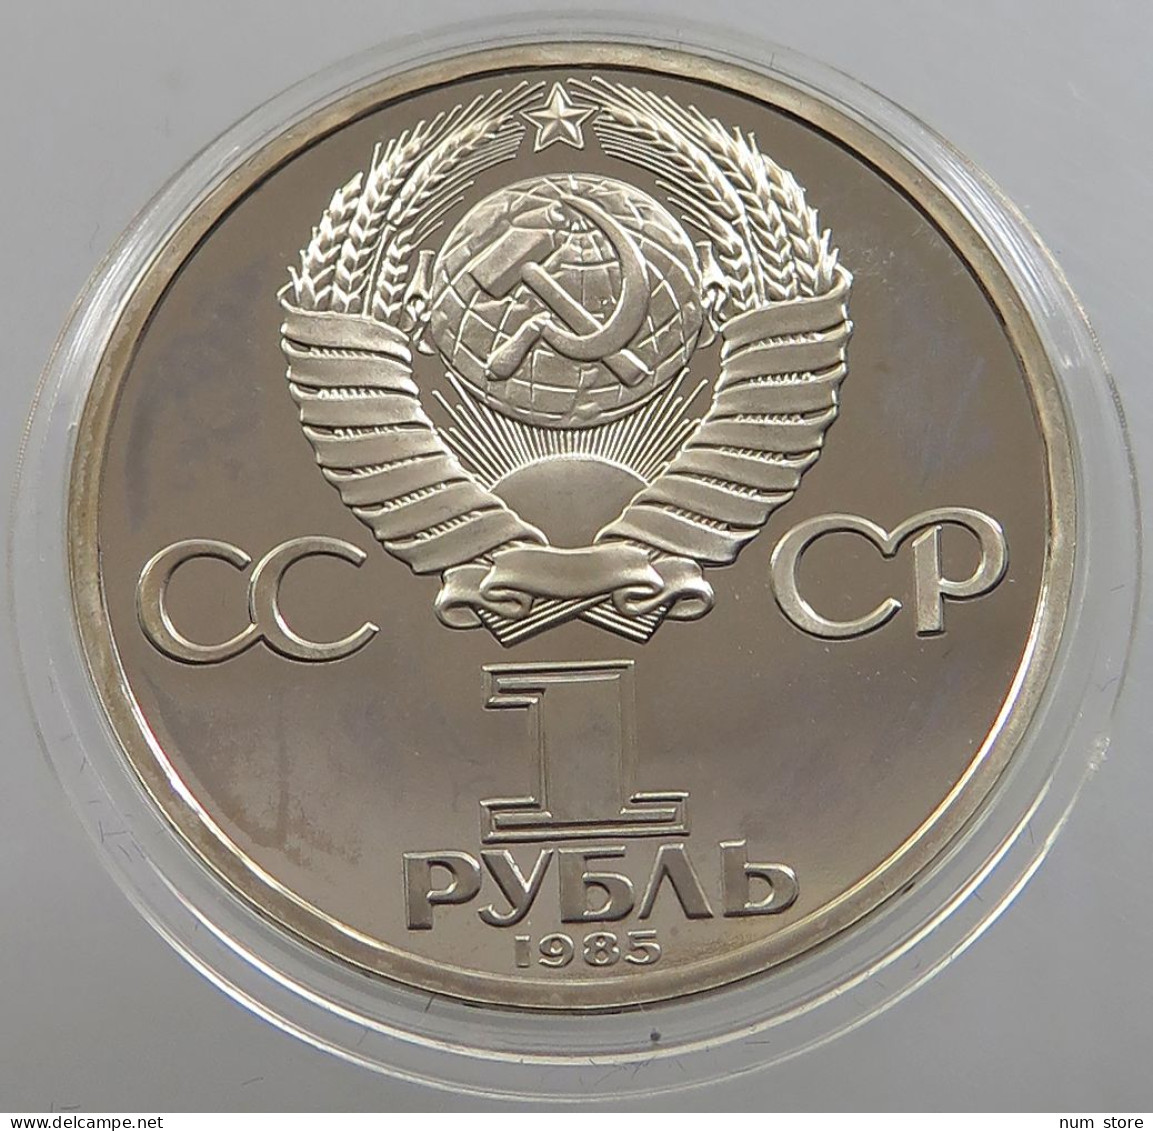 RUSSIA USSR 1 ROUBLE 1985 1988 ENGELS PROOF #sm14 0763 - Russia